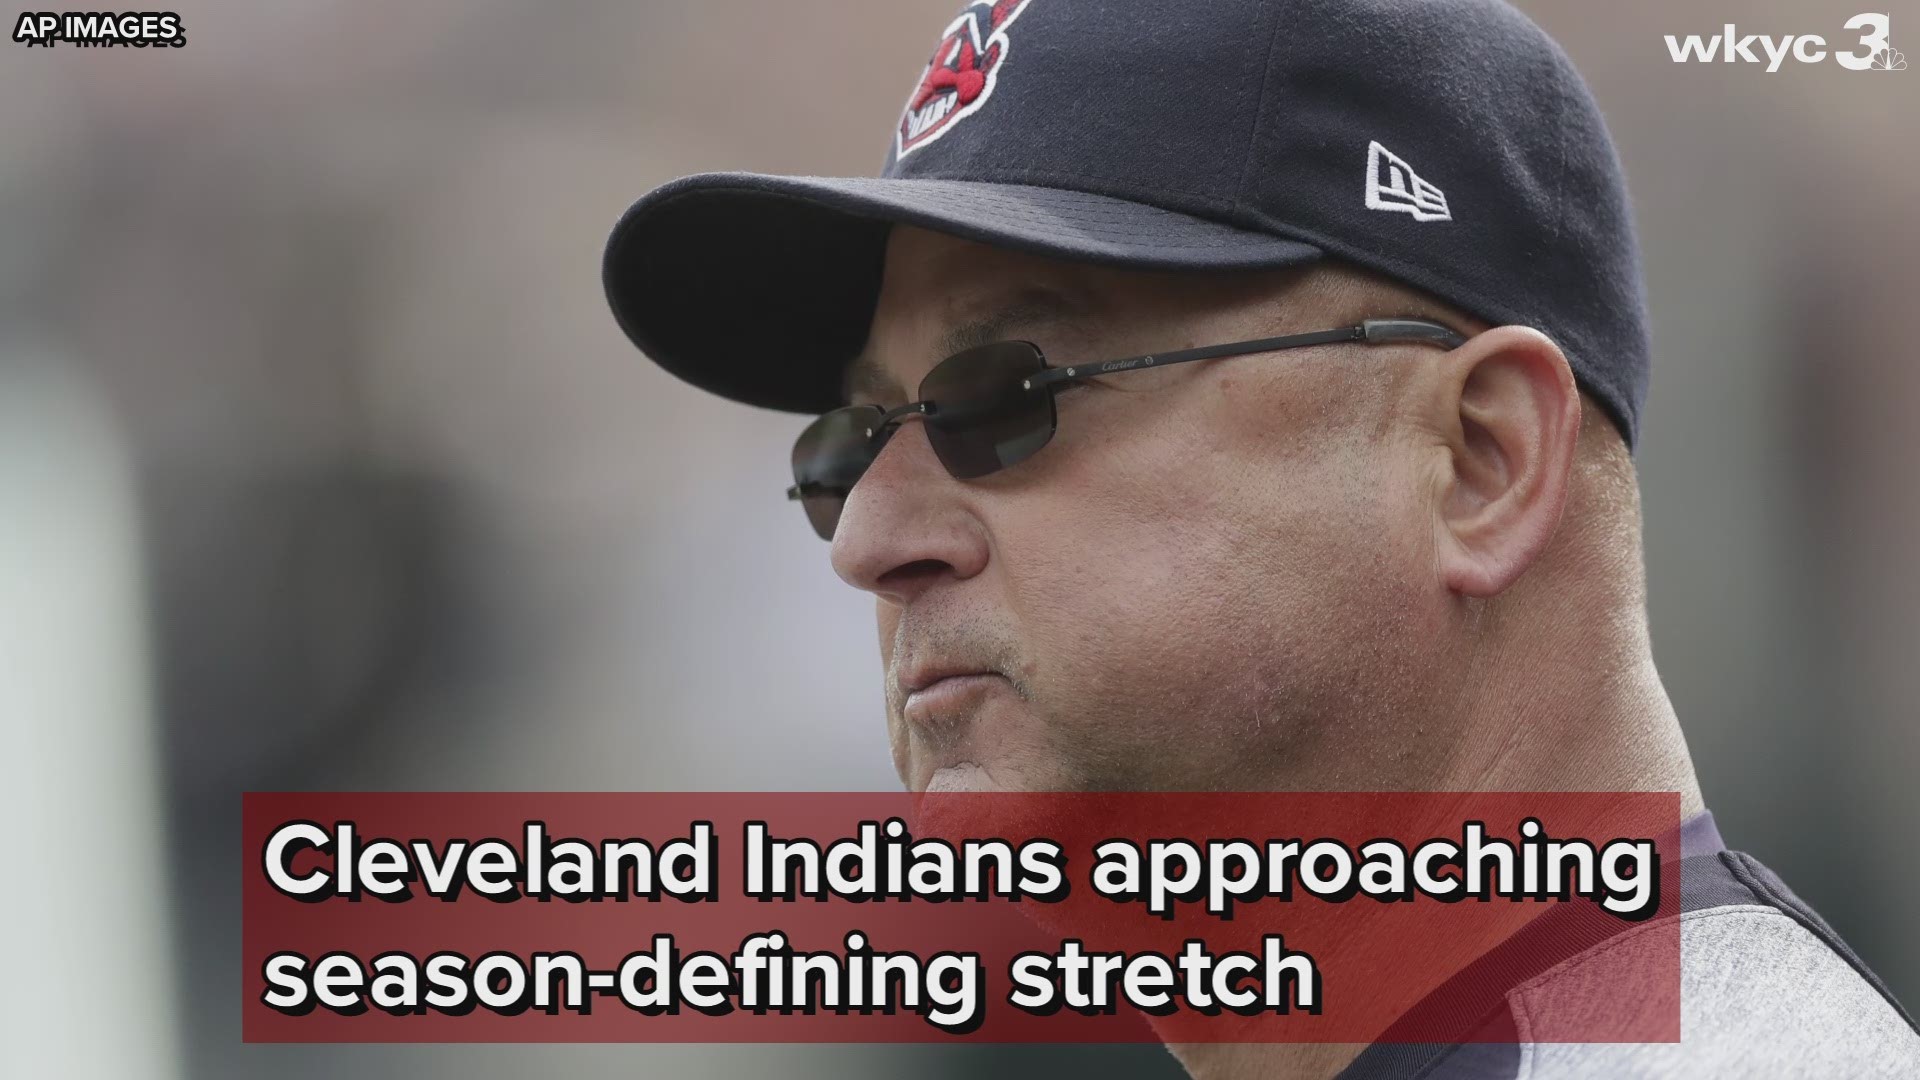 With 11 games against the Minnesota Twins, Boston Red Sox and New York Yankees, the Cleveland Indians' fate in the American League Central could soon be sealed.